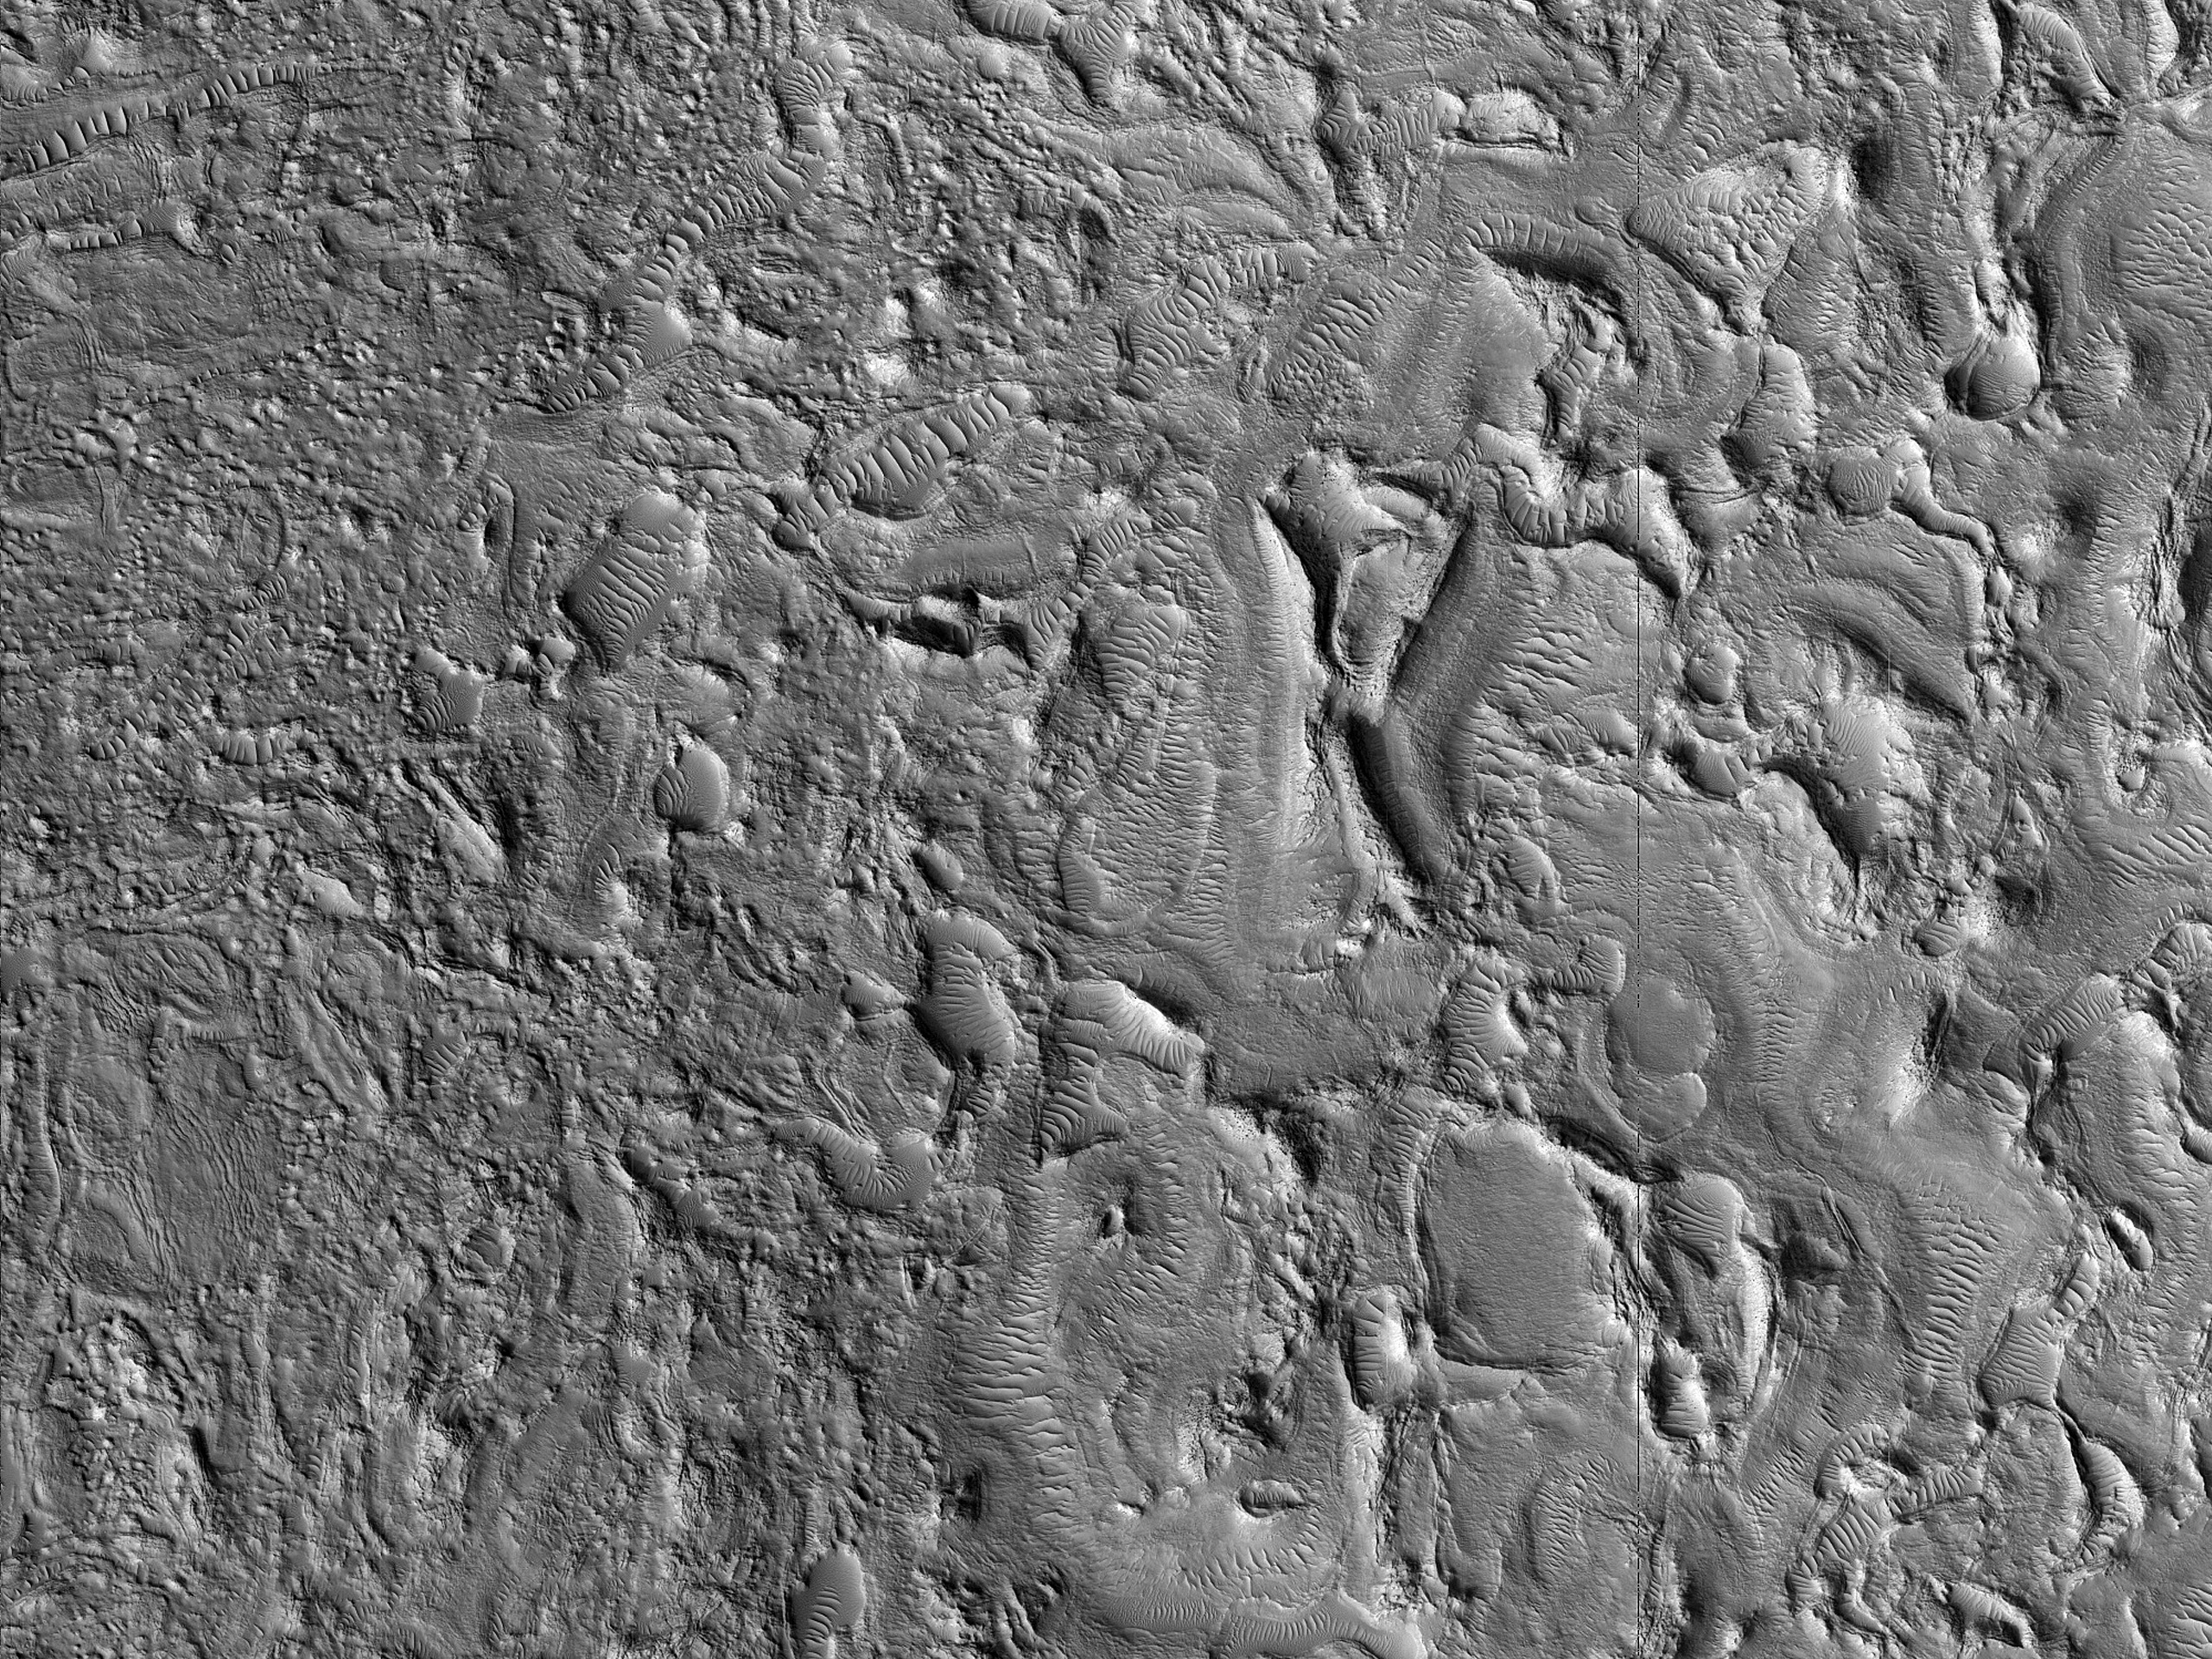 Ridges and Troughs in Crater Ejecta